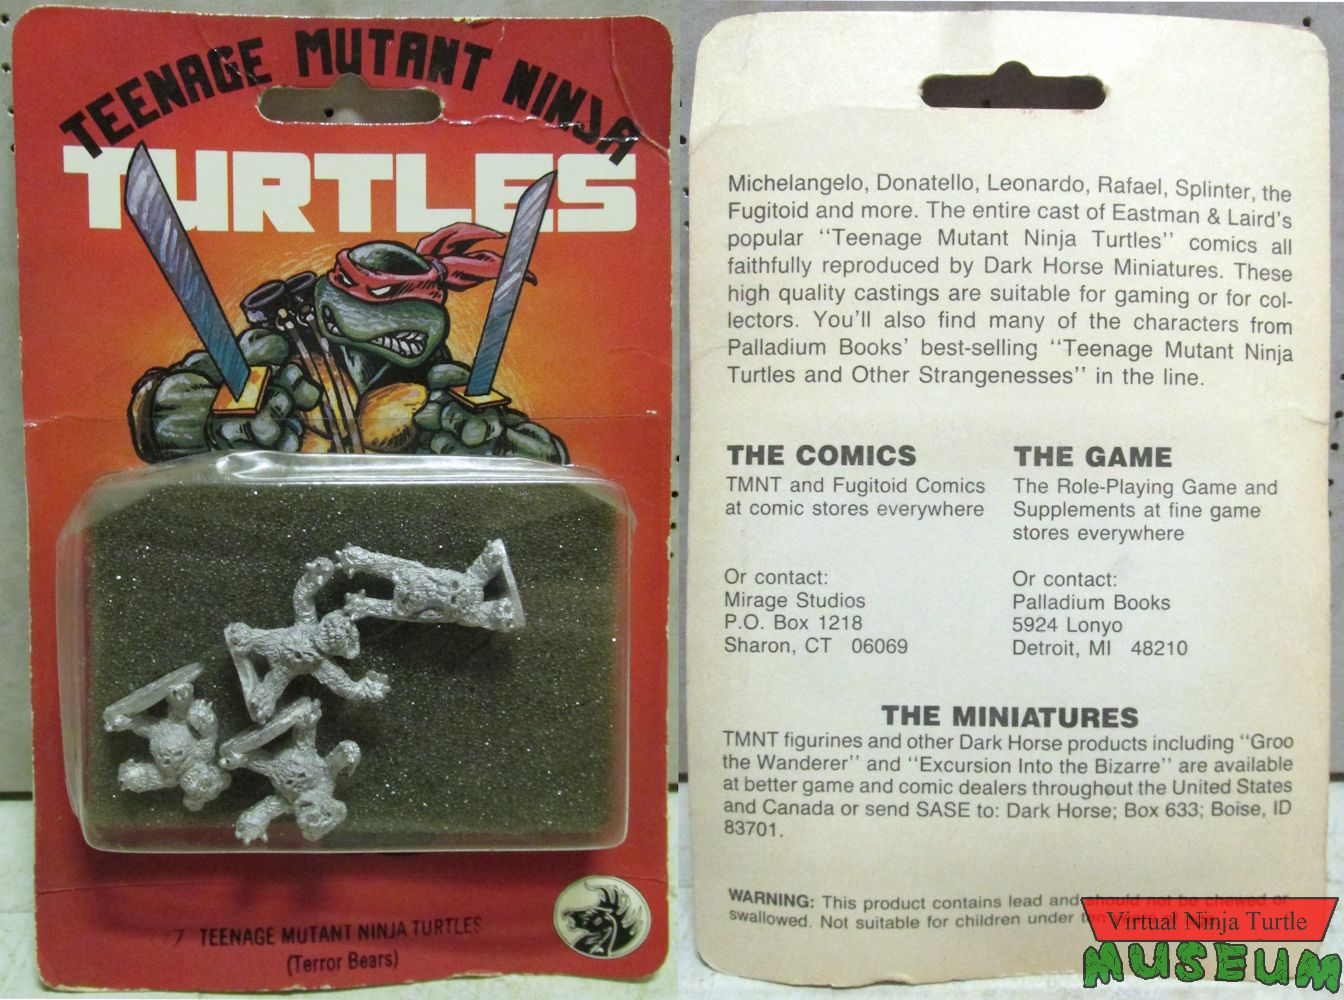 TMNT Card front and back